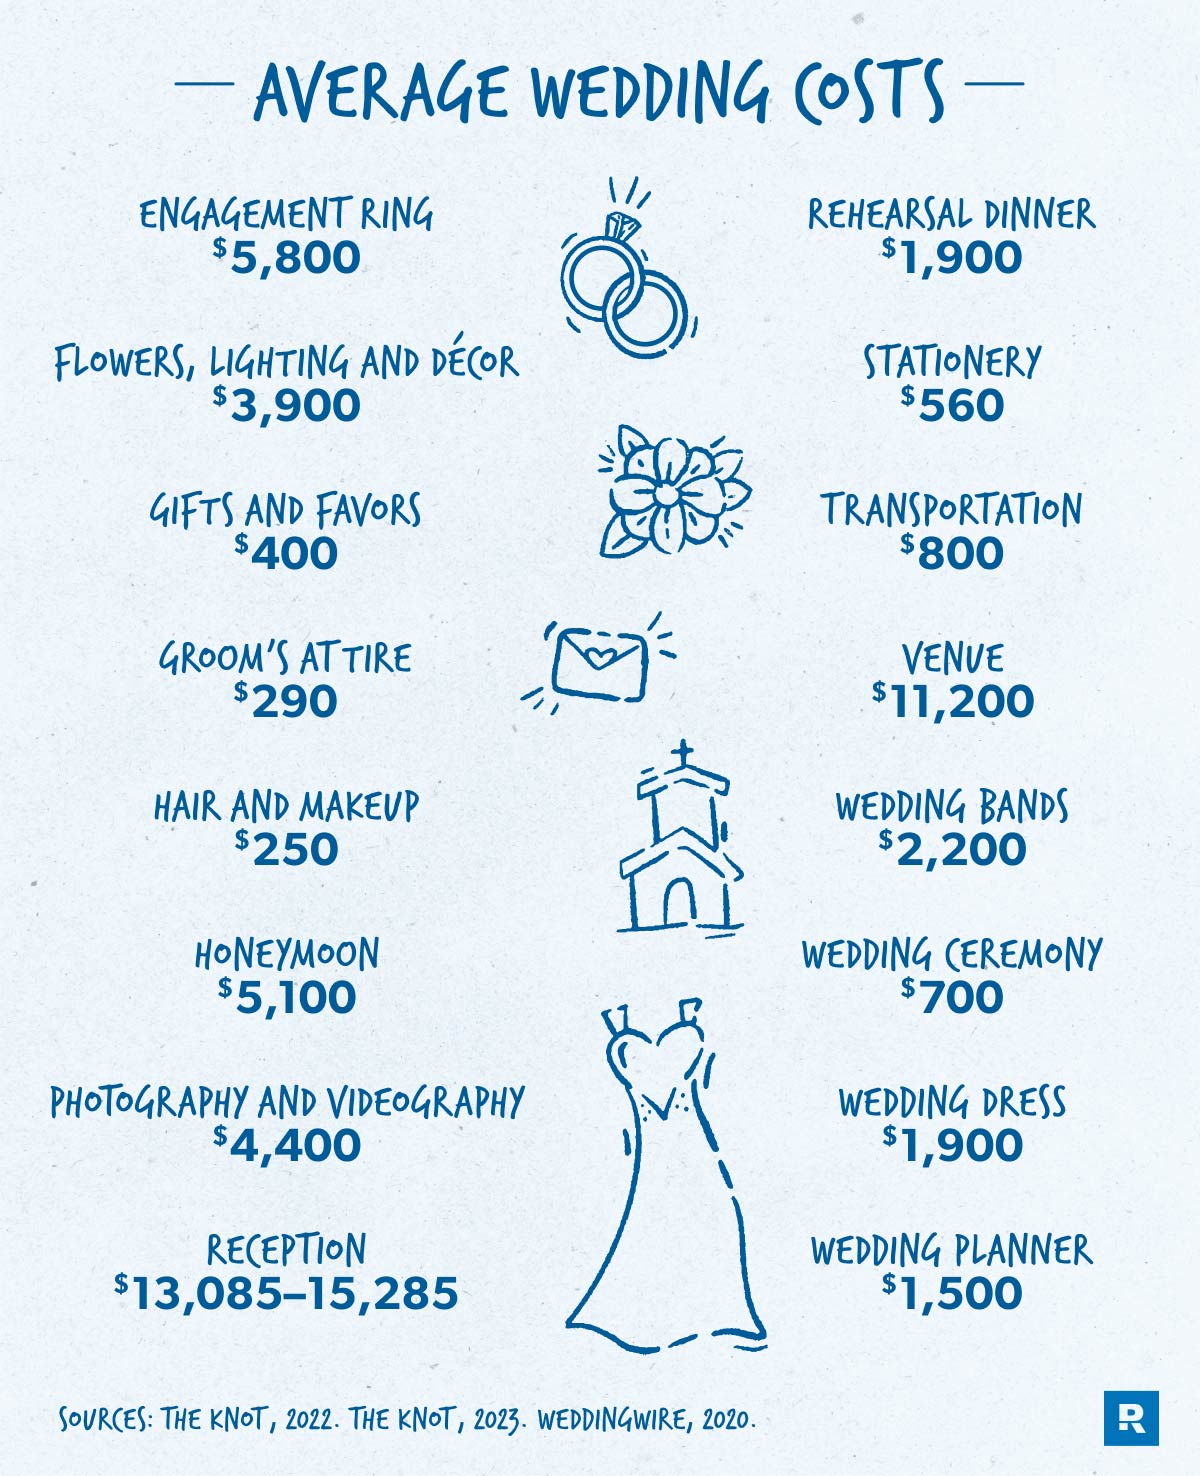 How much does an average wedding cost